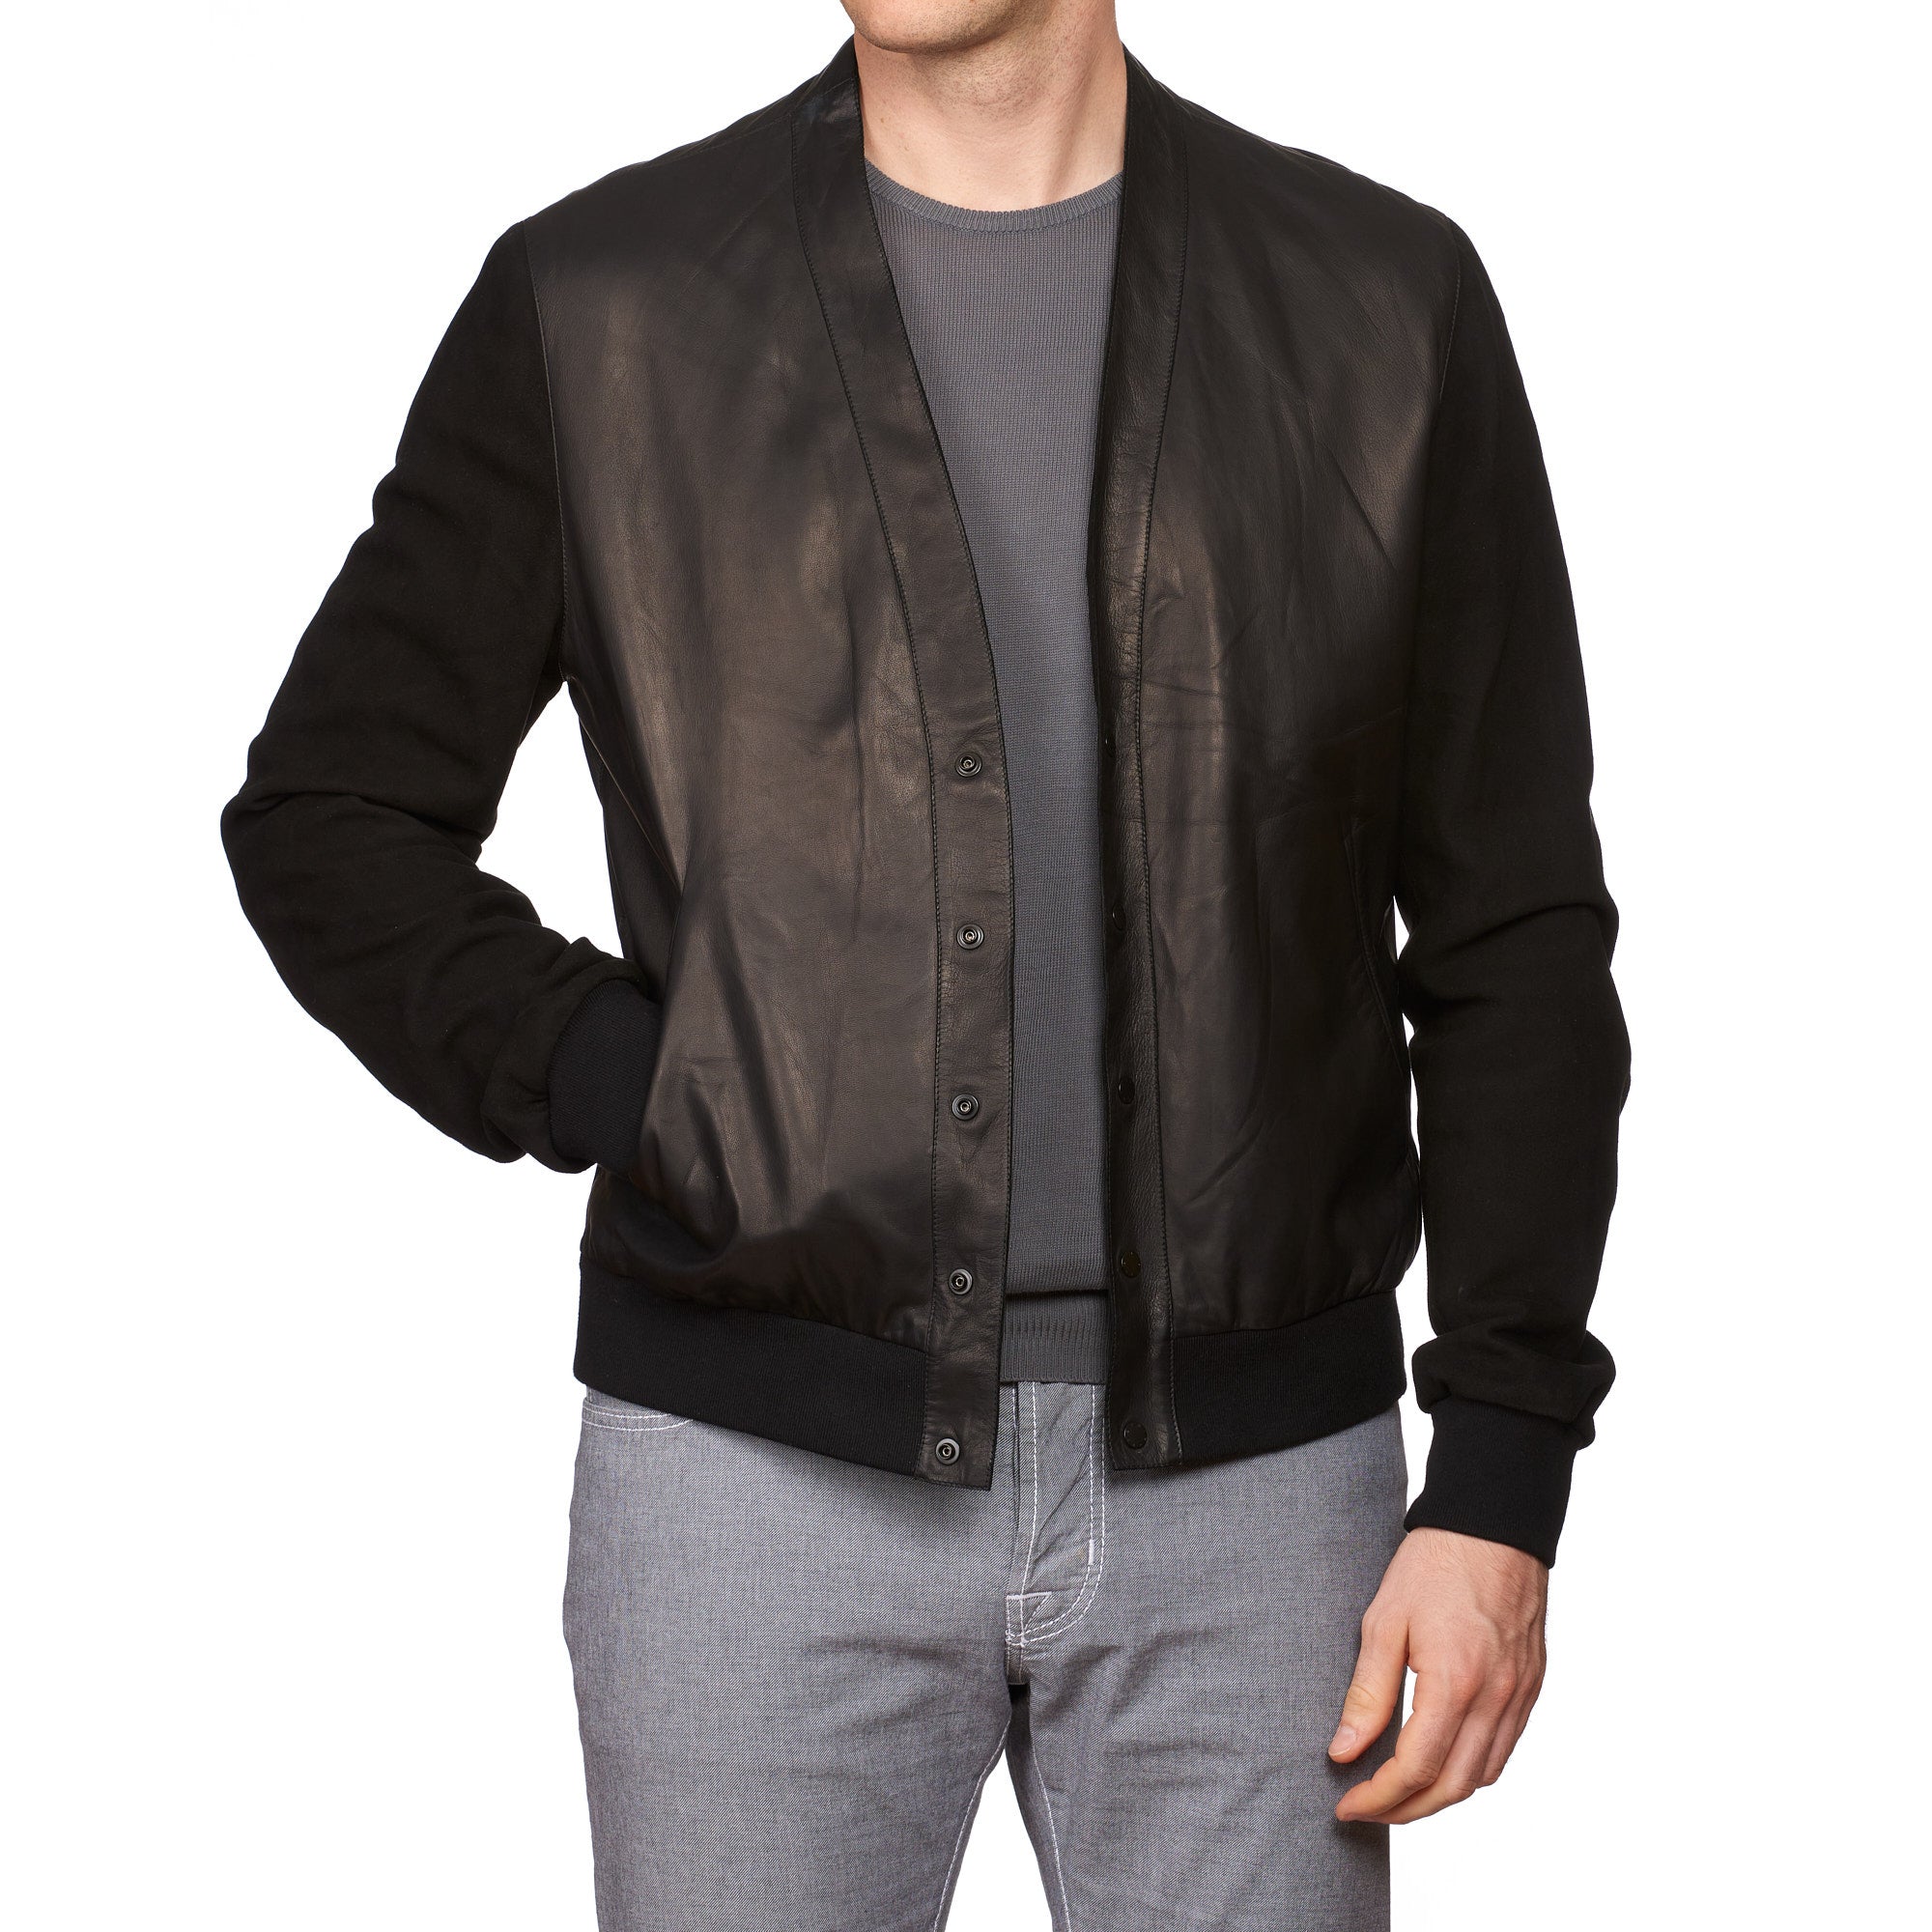 SERAPHIN Black Lamb Nappa & Suede Leather Unlined Cardigan Jacket Blouson FR 52 US L NEW